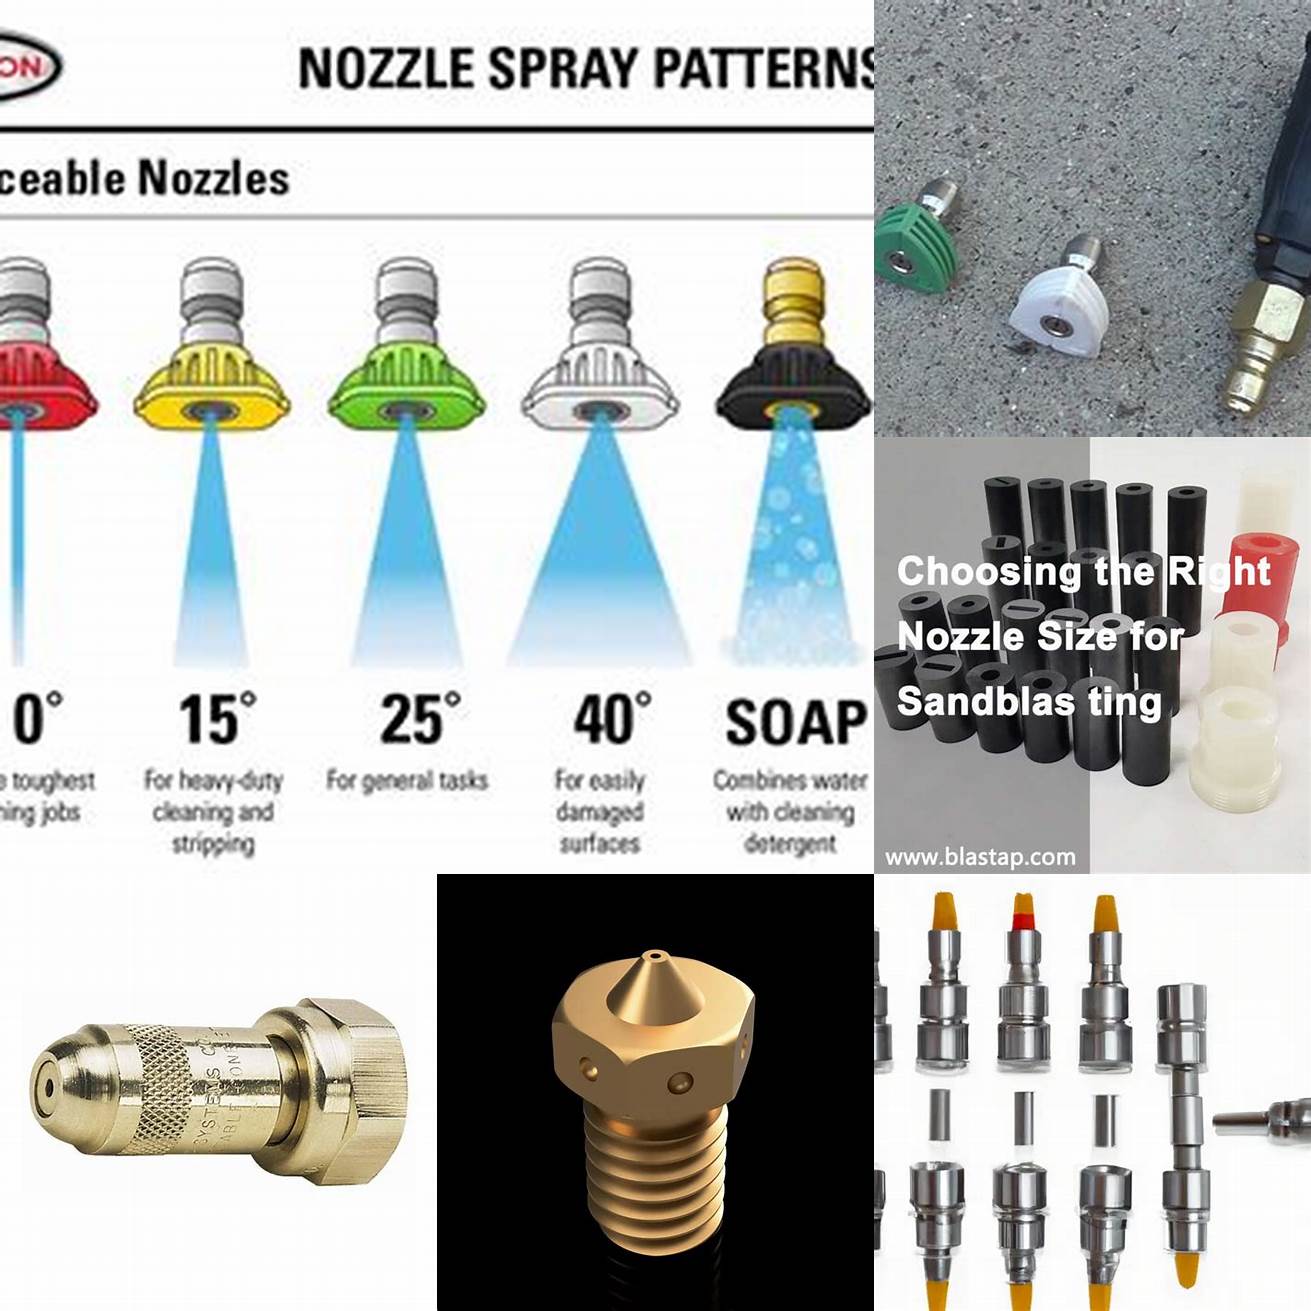 Choosing the Right Nozzle